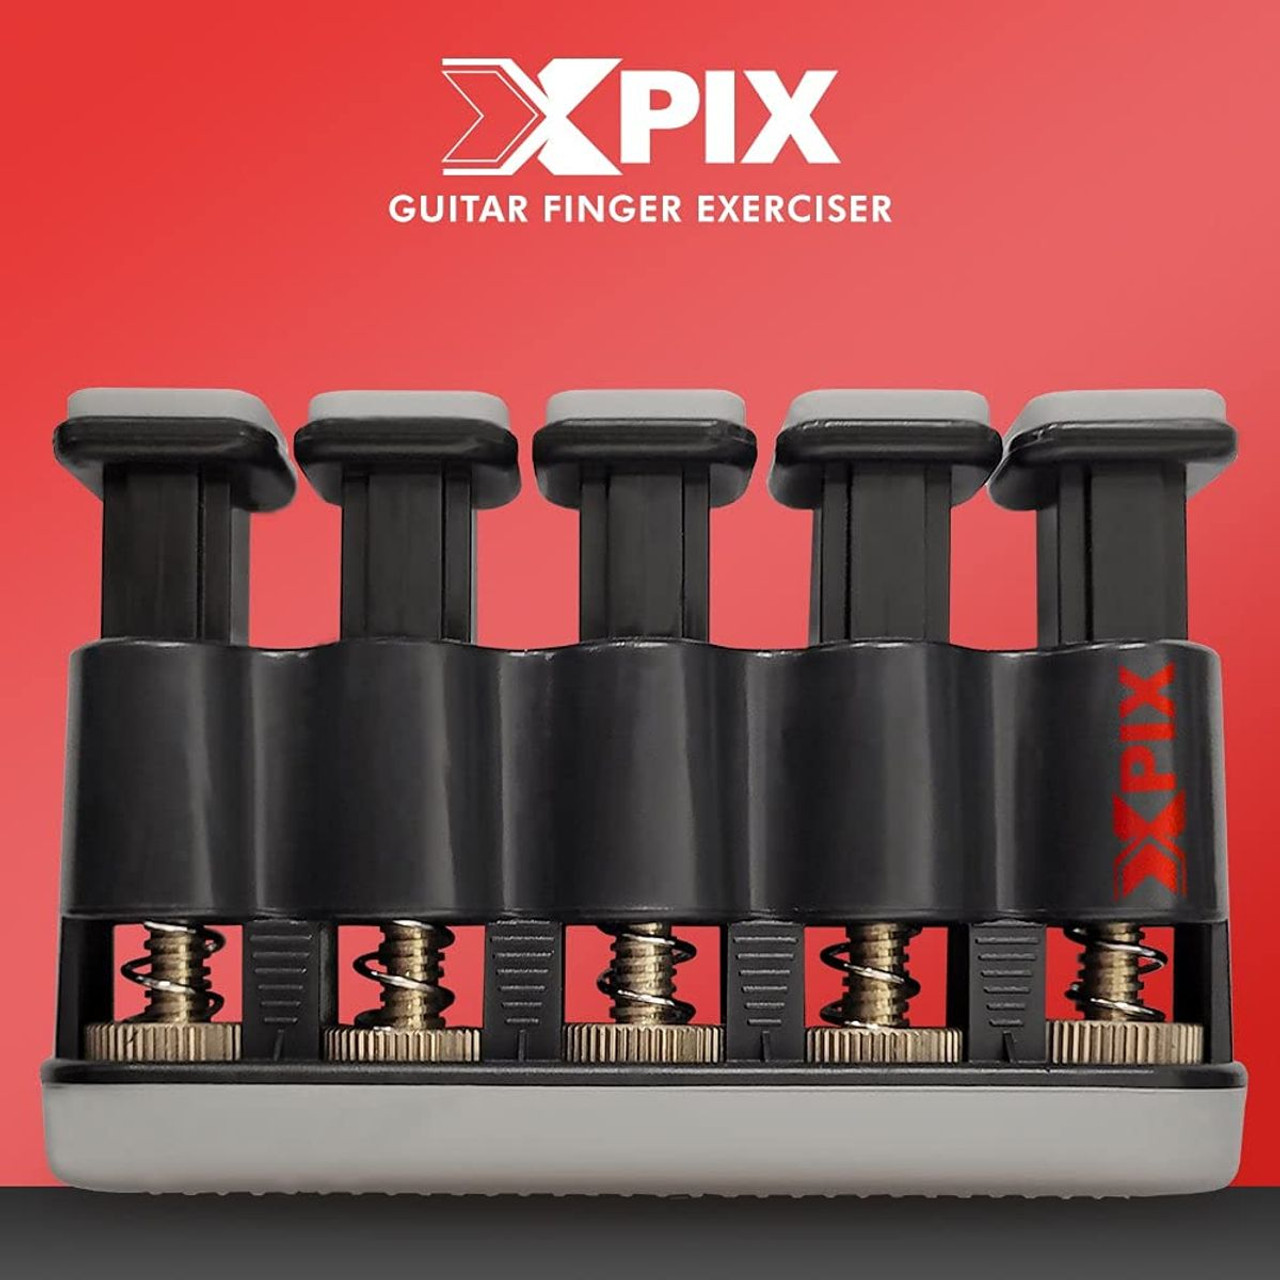 XPIX Guitar Finger Exerciser for Training and Accuracy product image